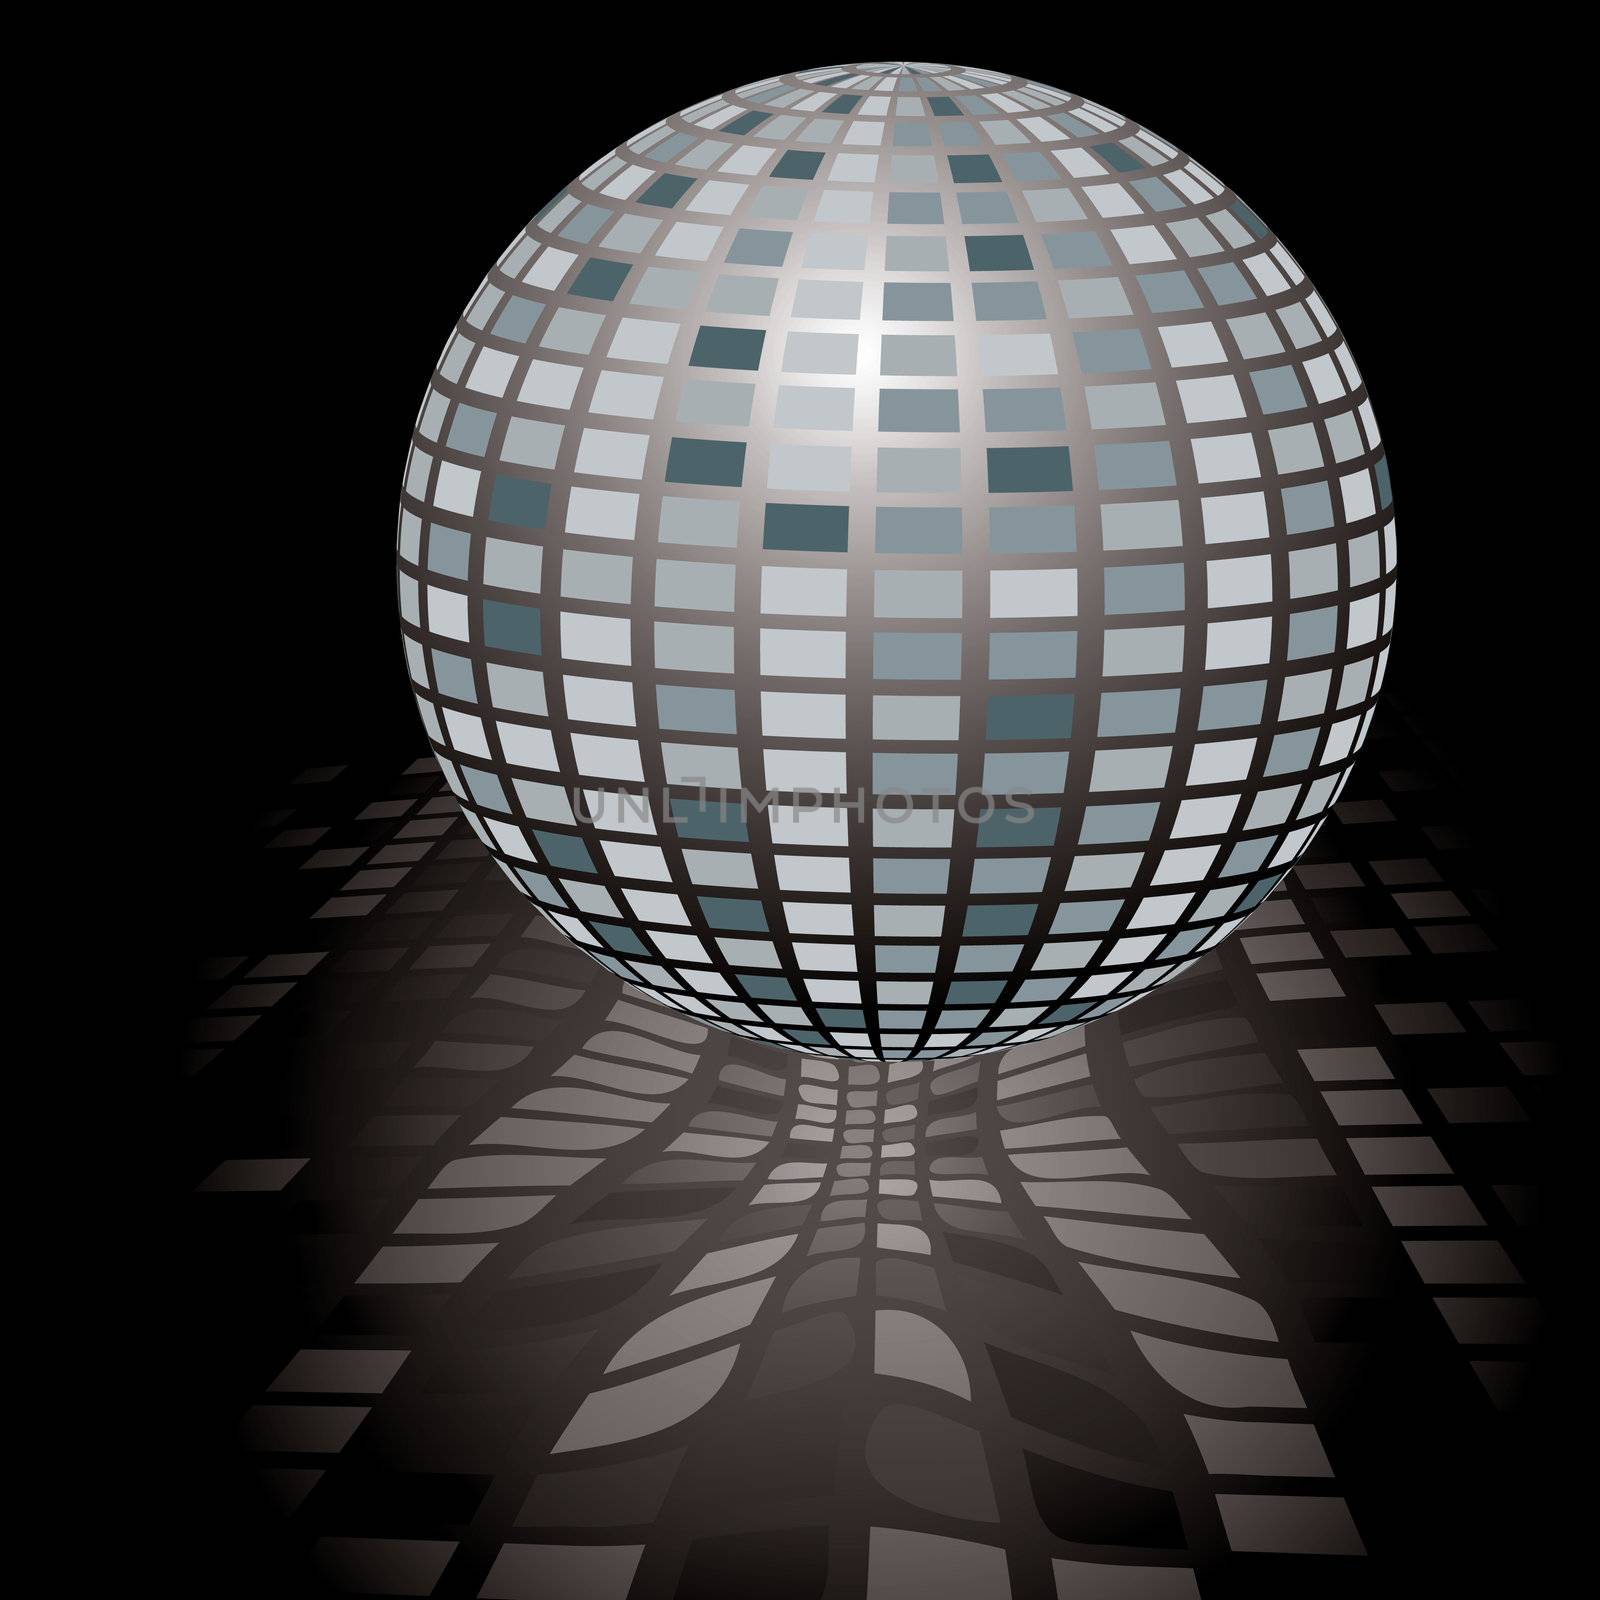 Illustration of a seventies style disco ball with reflection